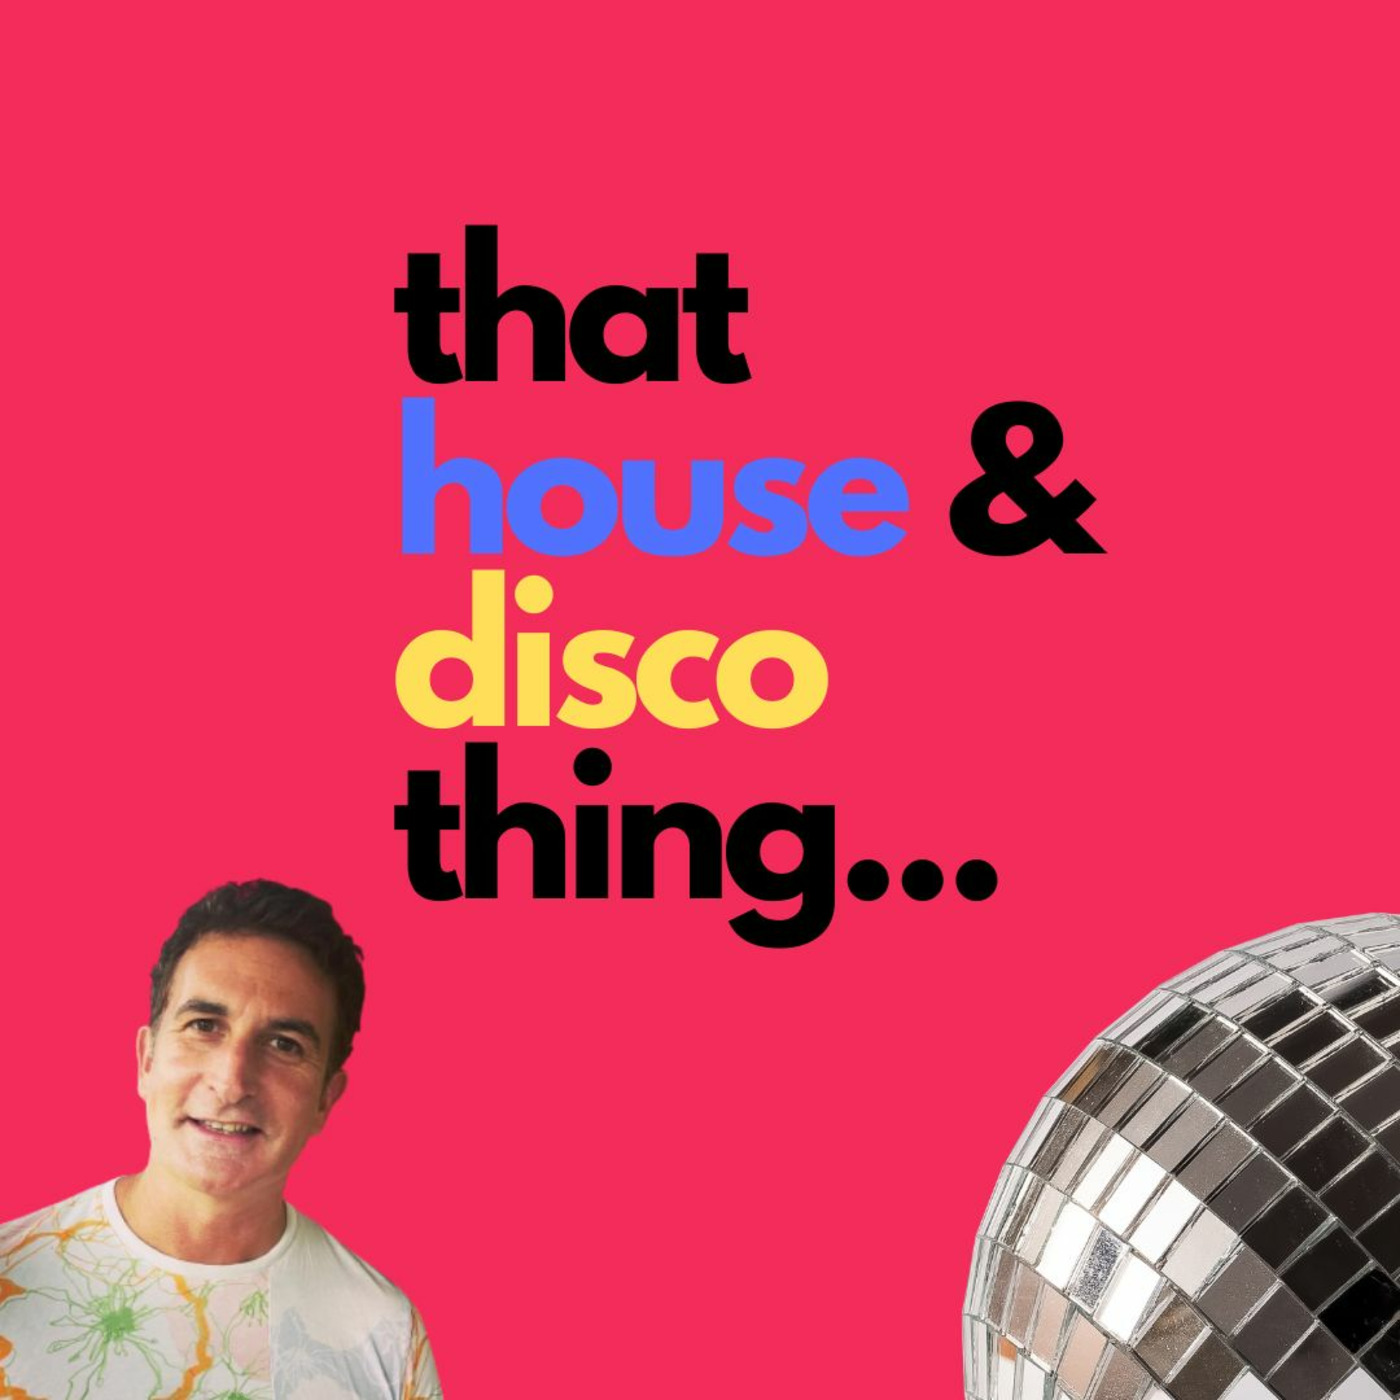 Show artwork for that house and disco thing... 